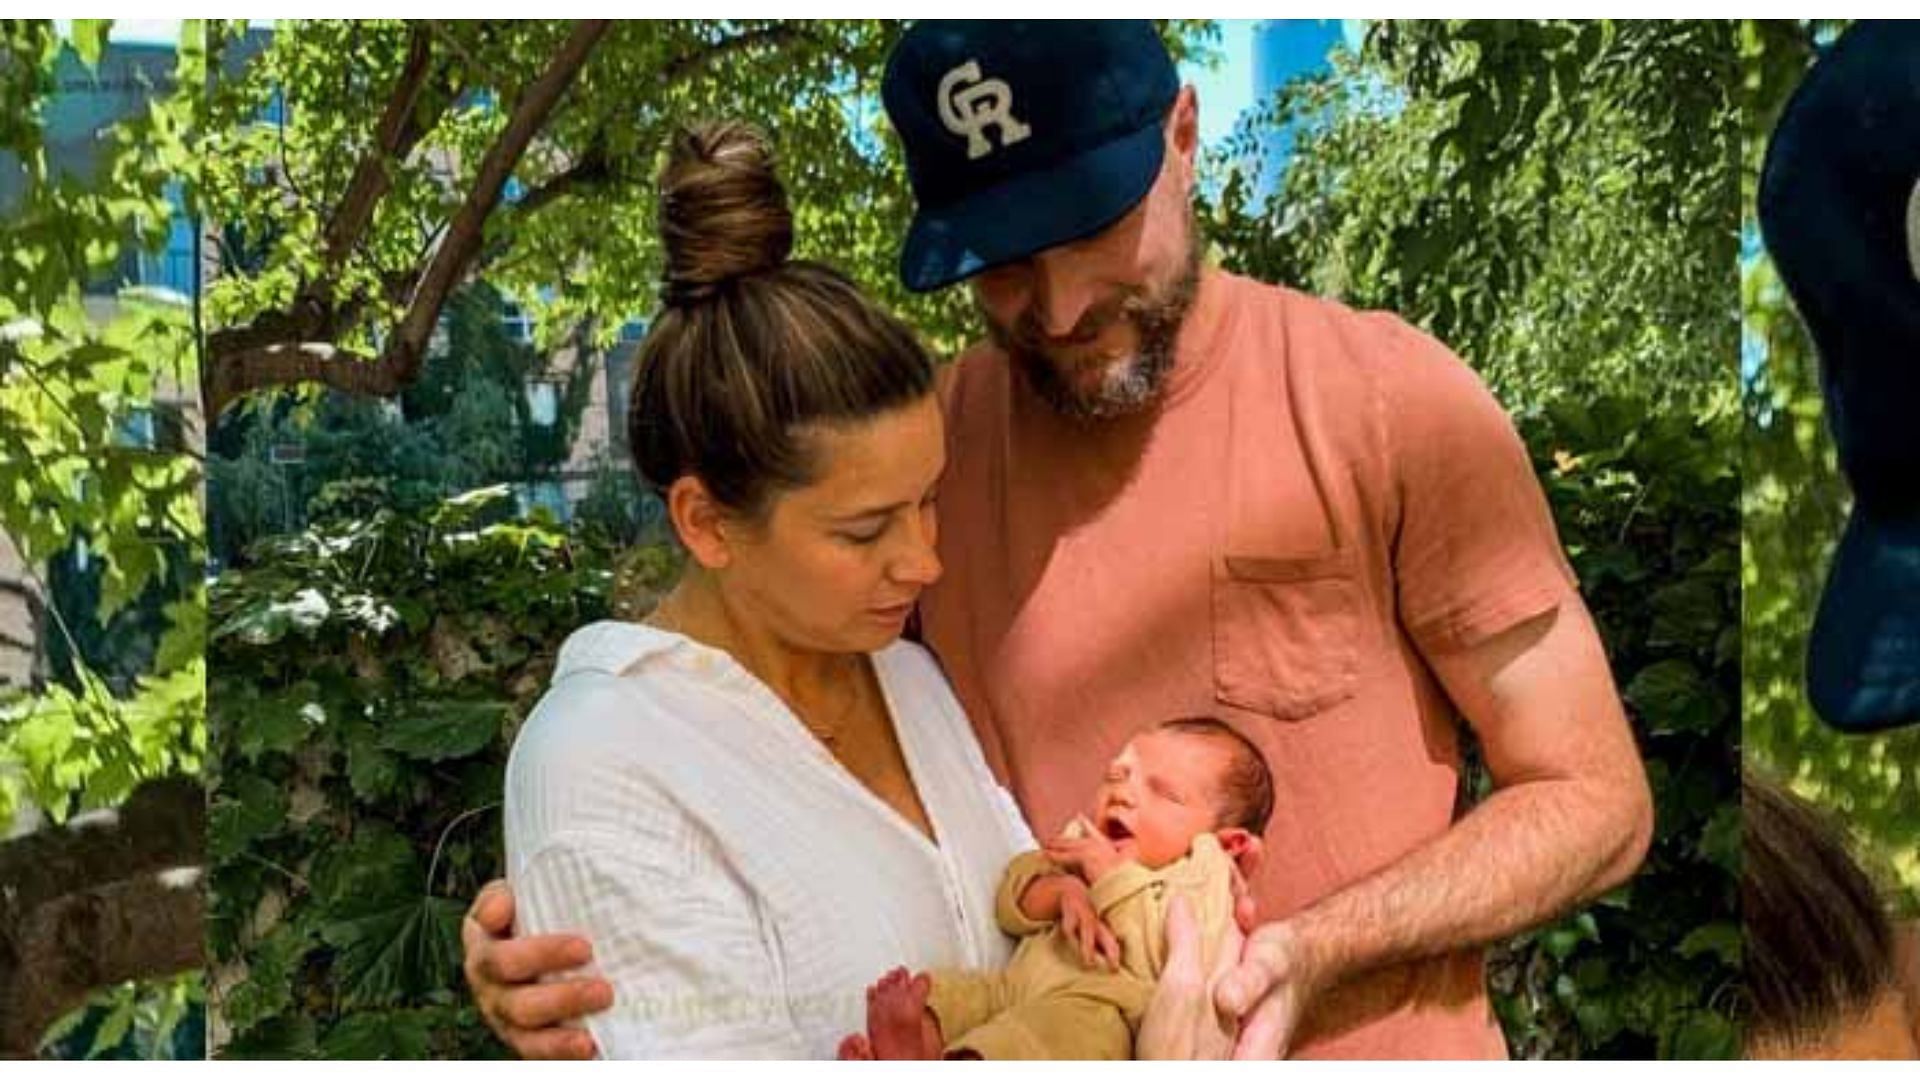 Rocco Baldelli and his wife with their baby daughter